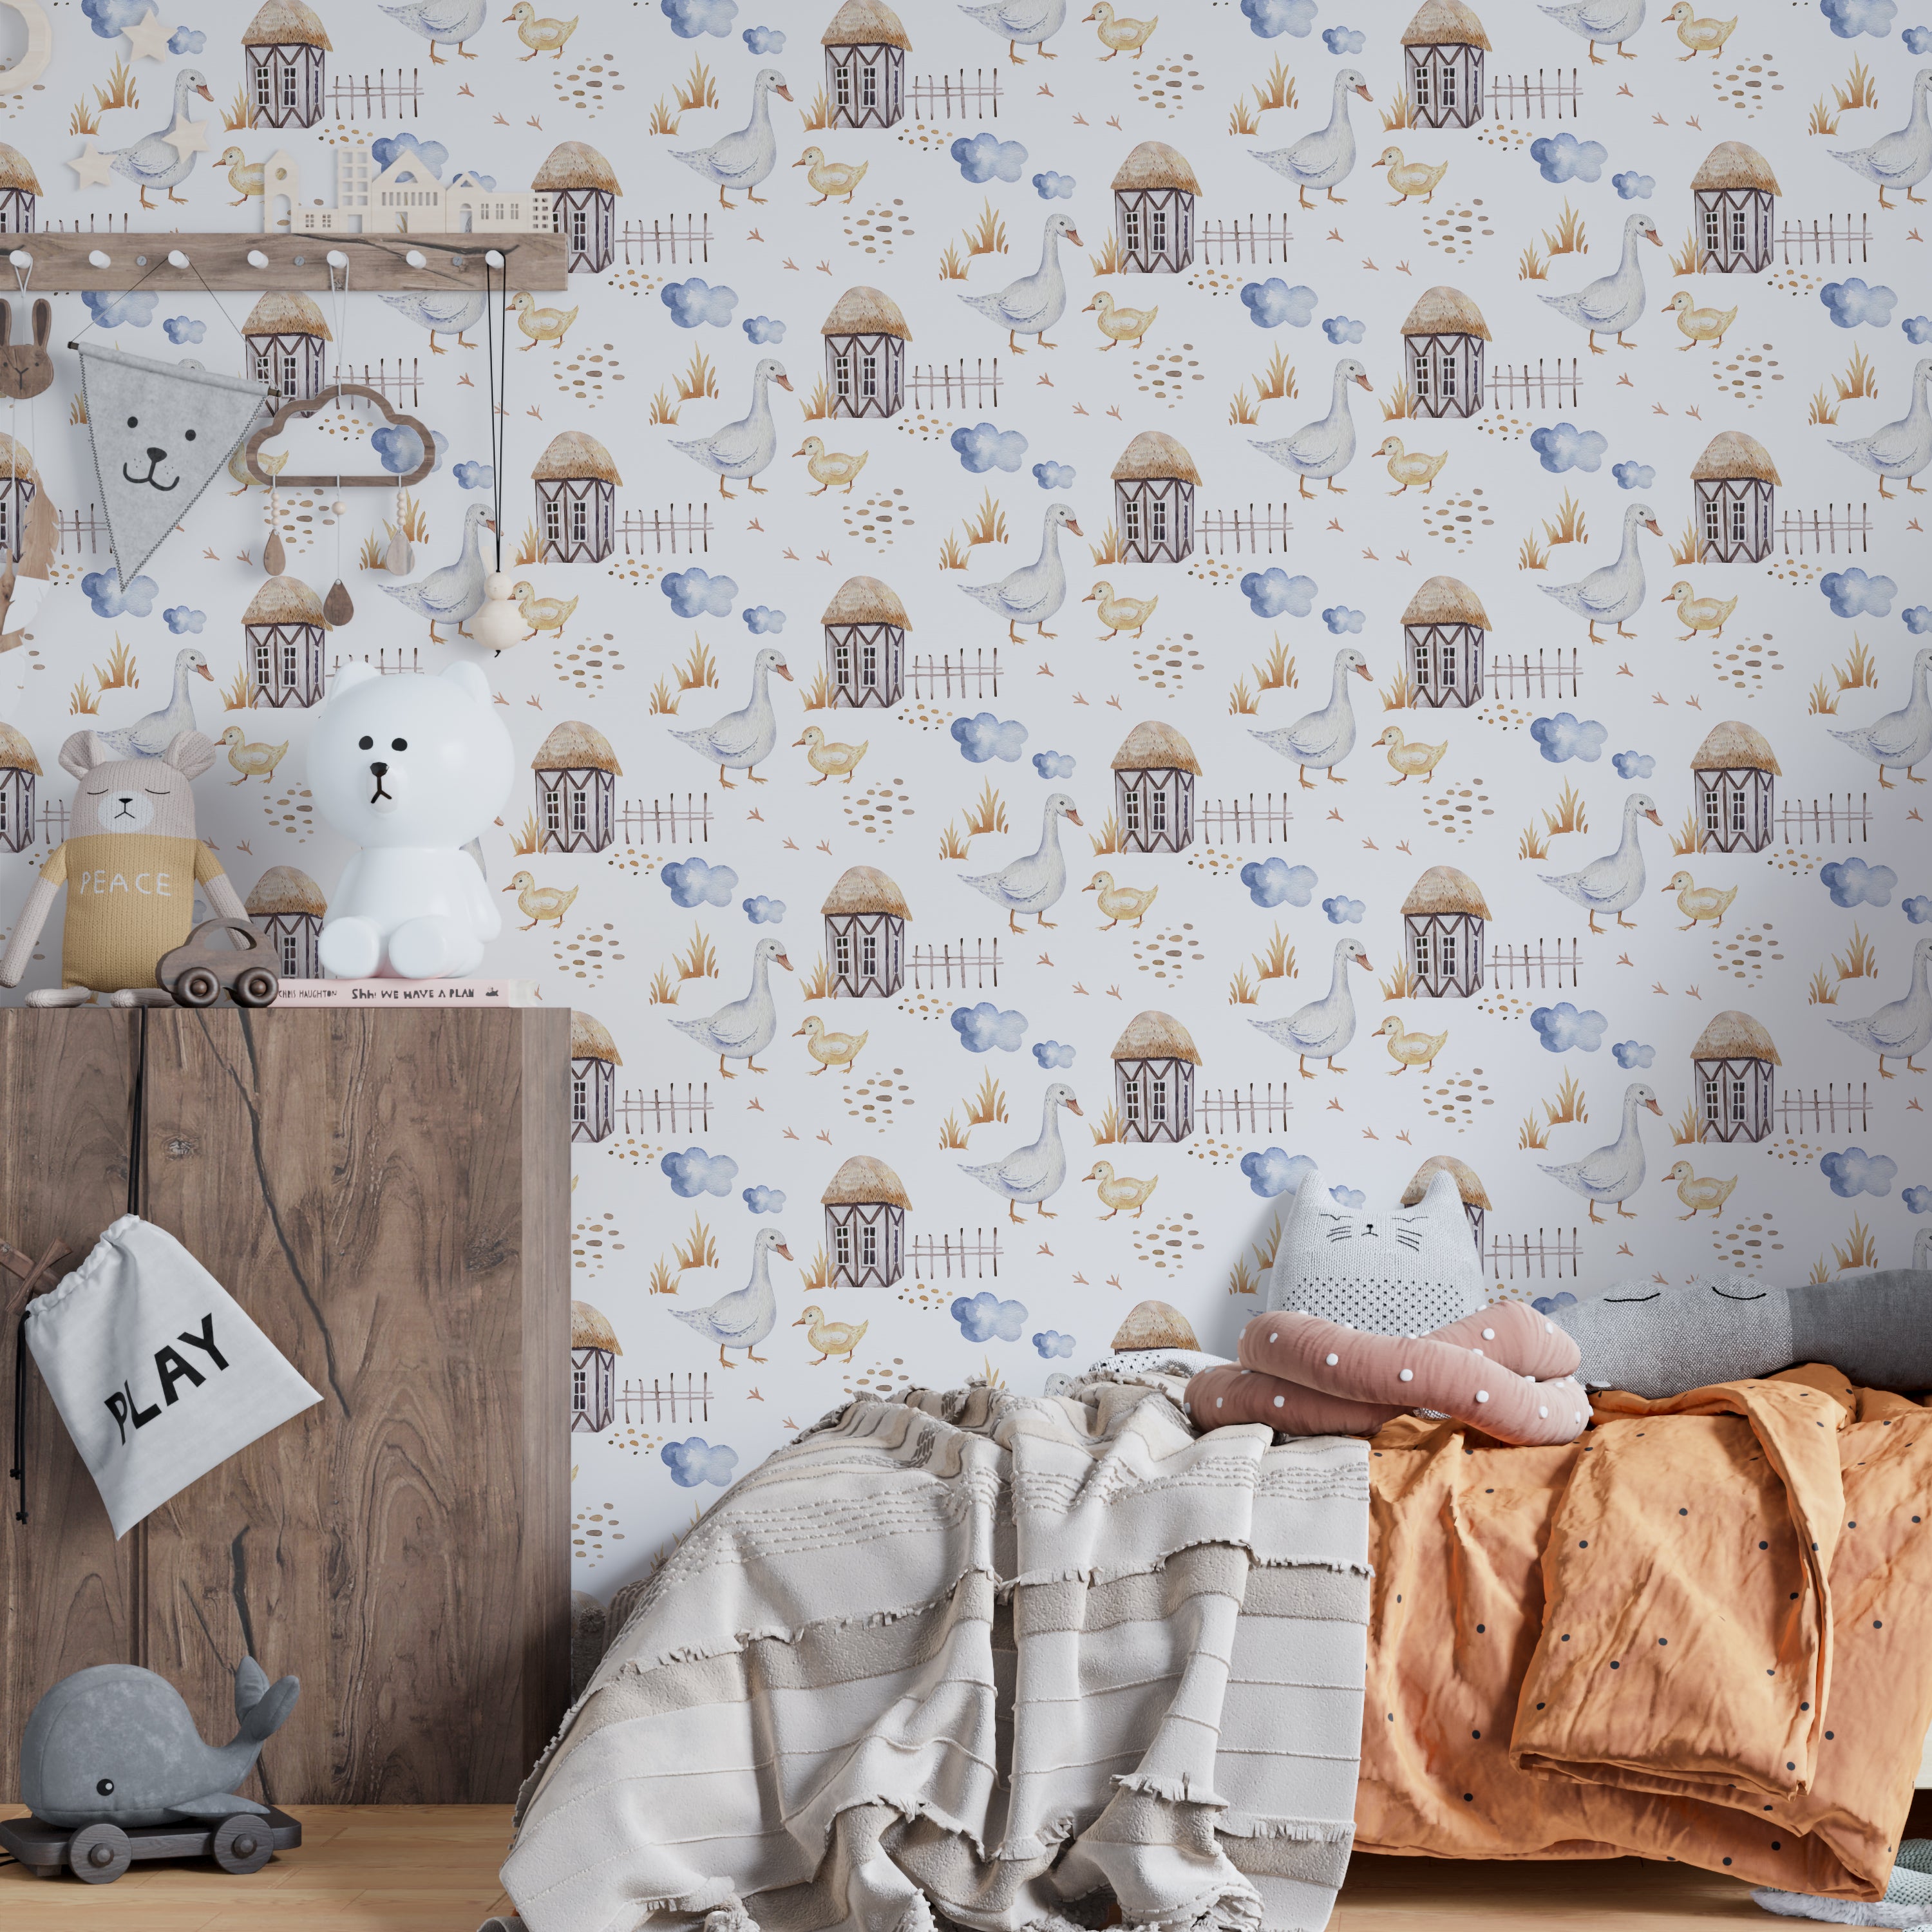 A child's nursery room decorated with 'Watercolor Farm Animals VI' wallpaper displaying a peaceful farm setting with geese and chicks near quaint farmhouses, enhancing the room's cozy and pastoral ambiance